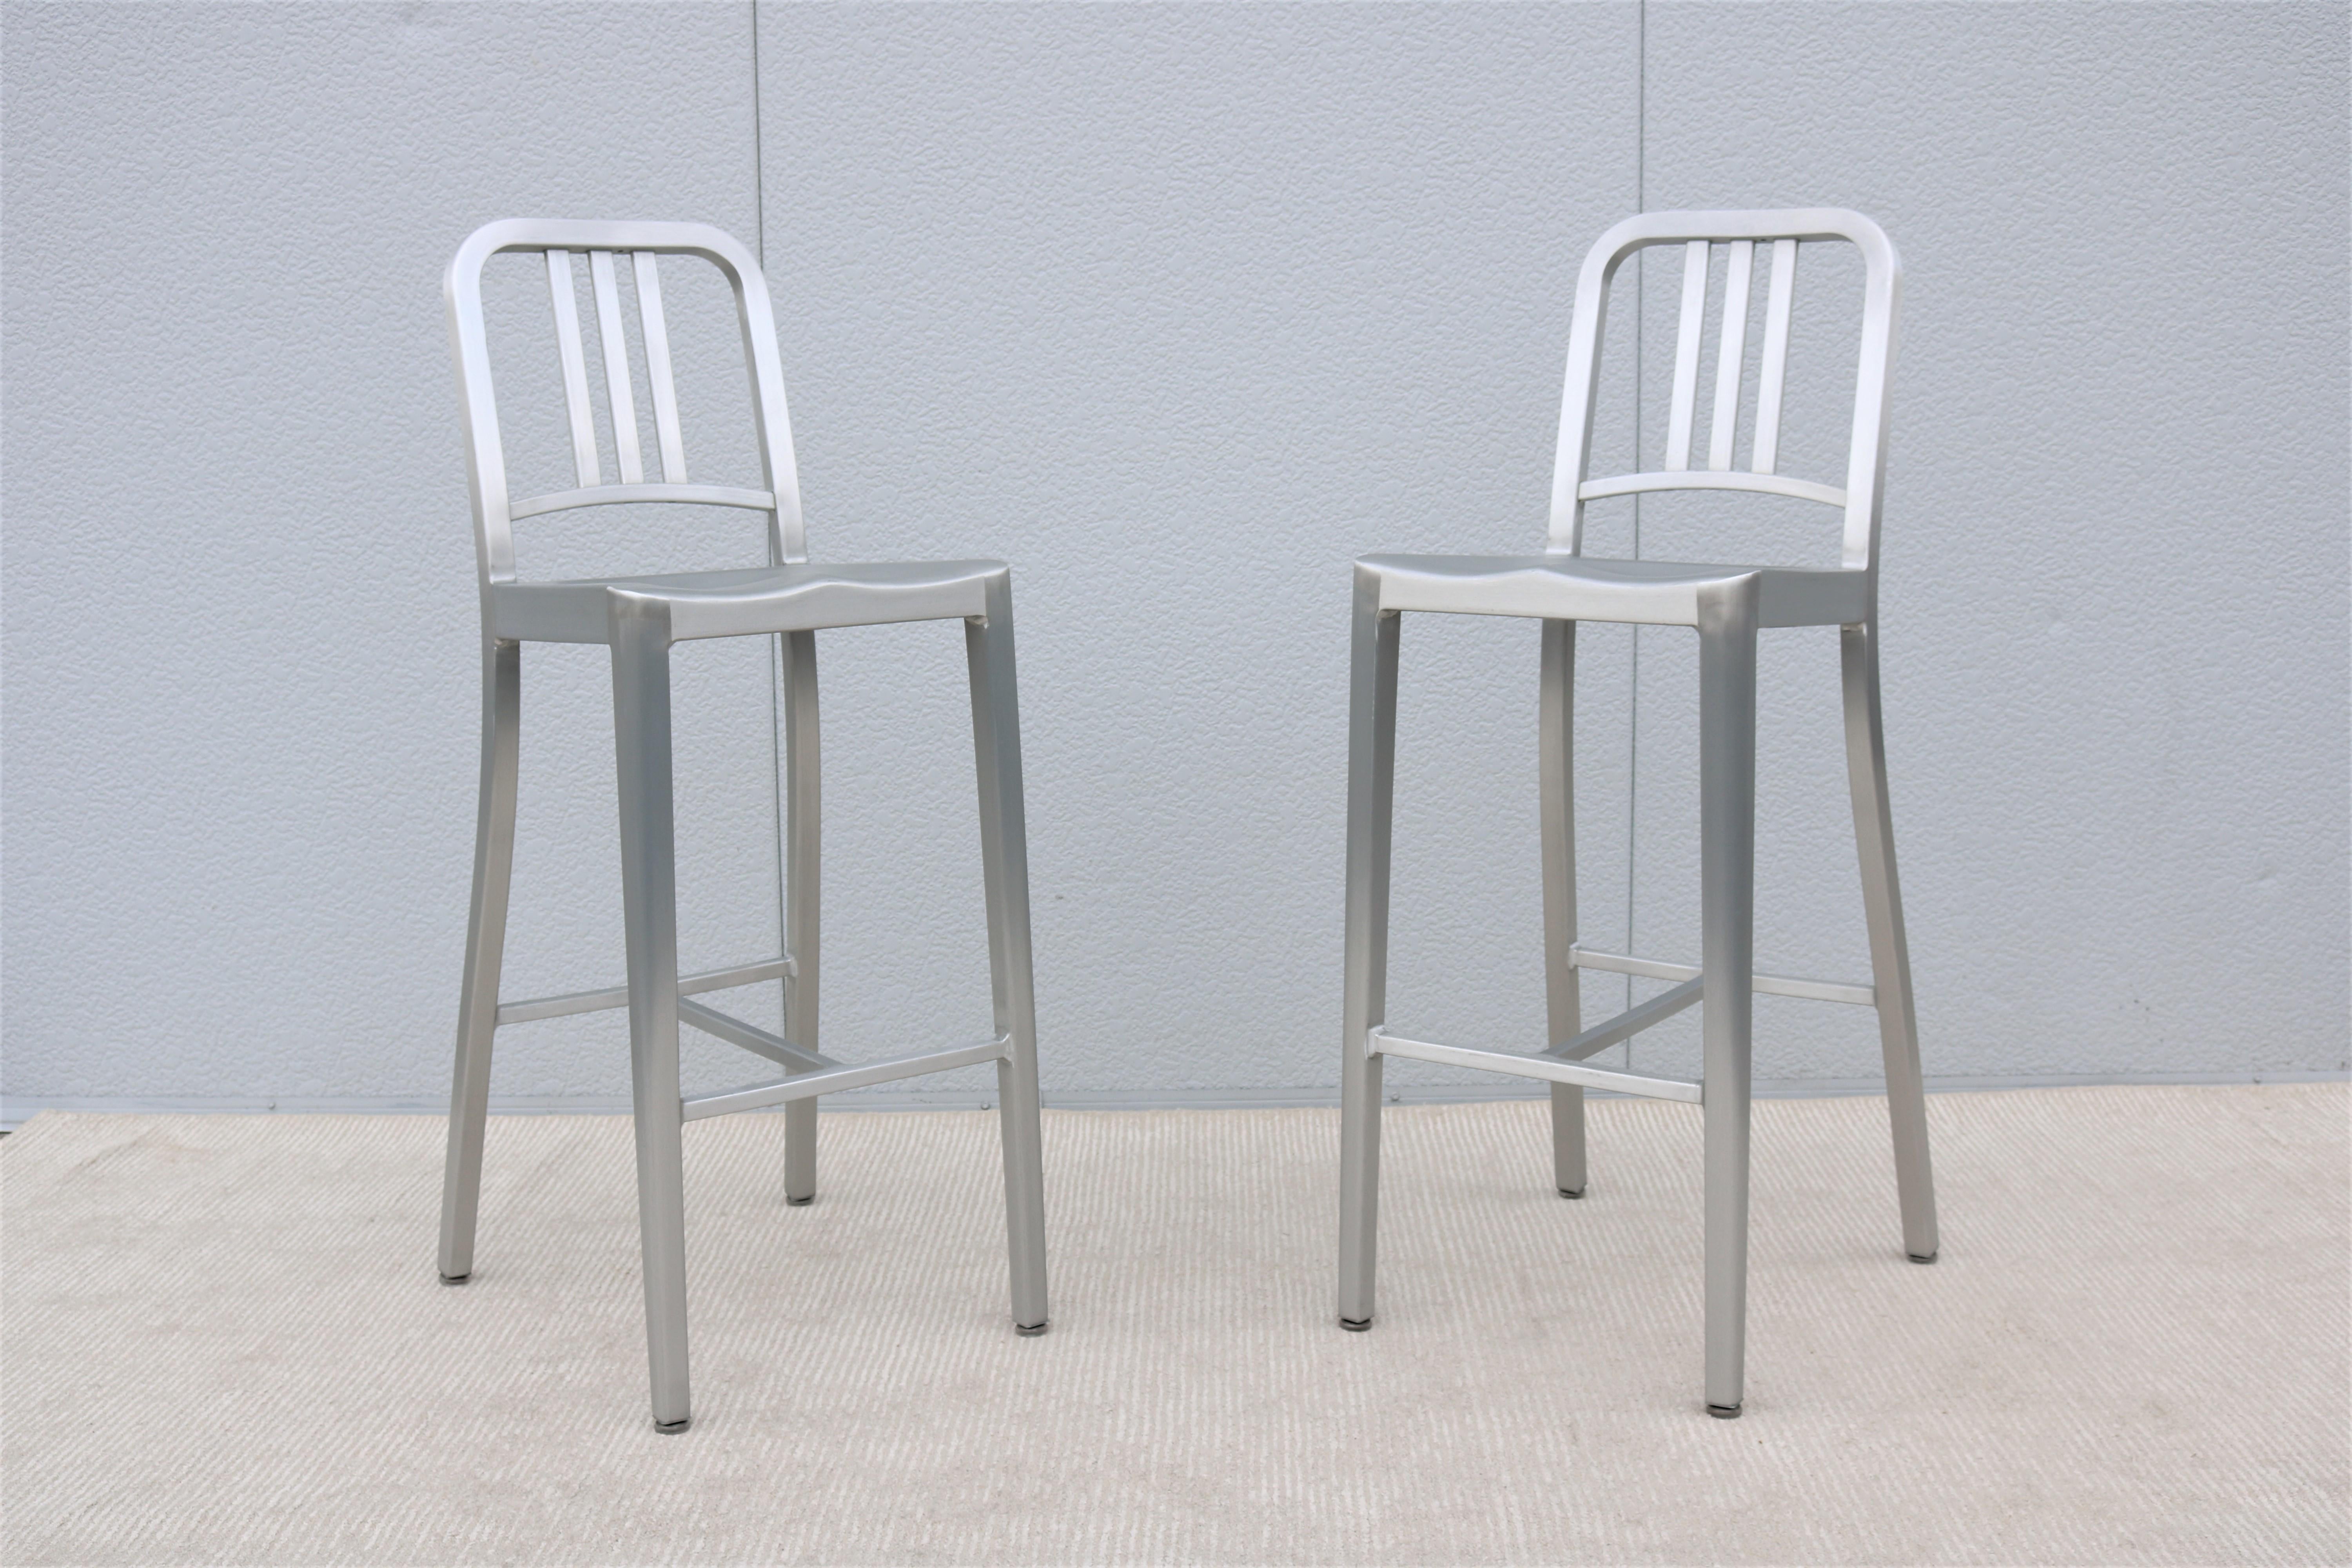 American Industrial Classic Emeco 1006 Navy Brushed Aluminum Bar Height Stools - a Pair For Sale